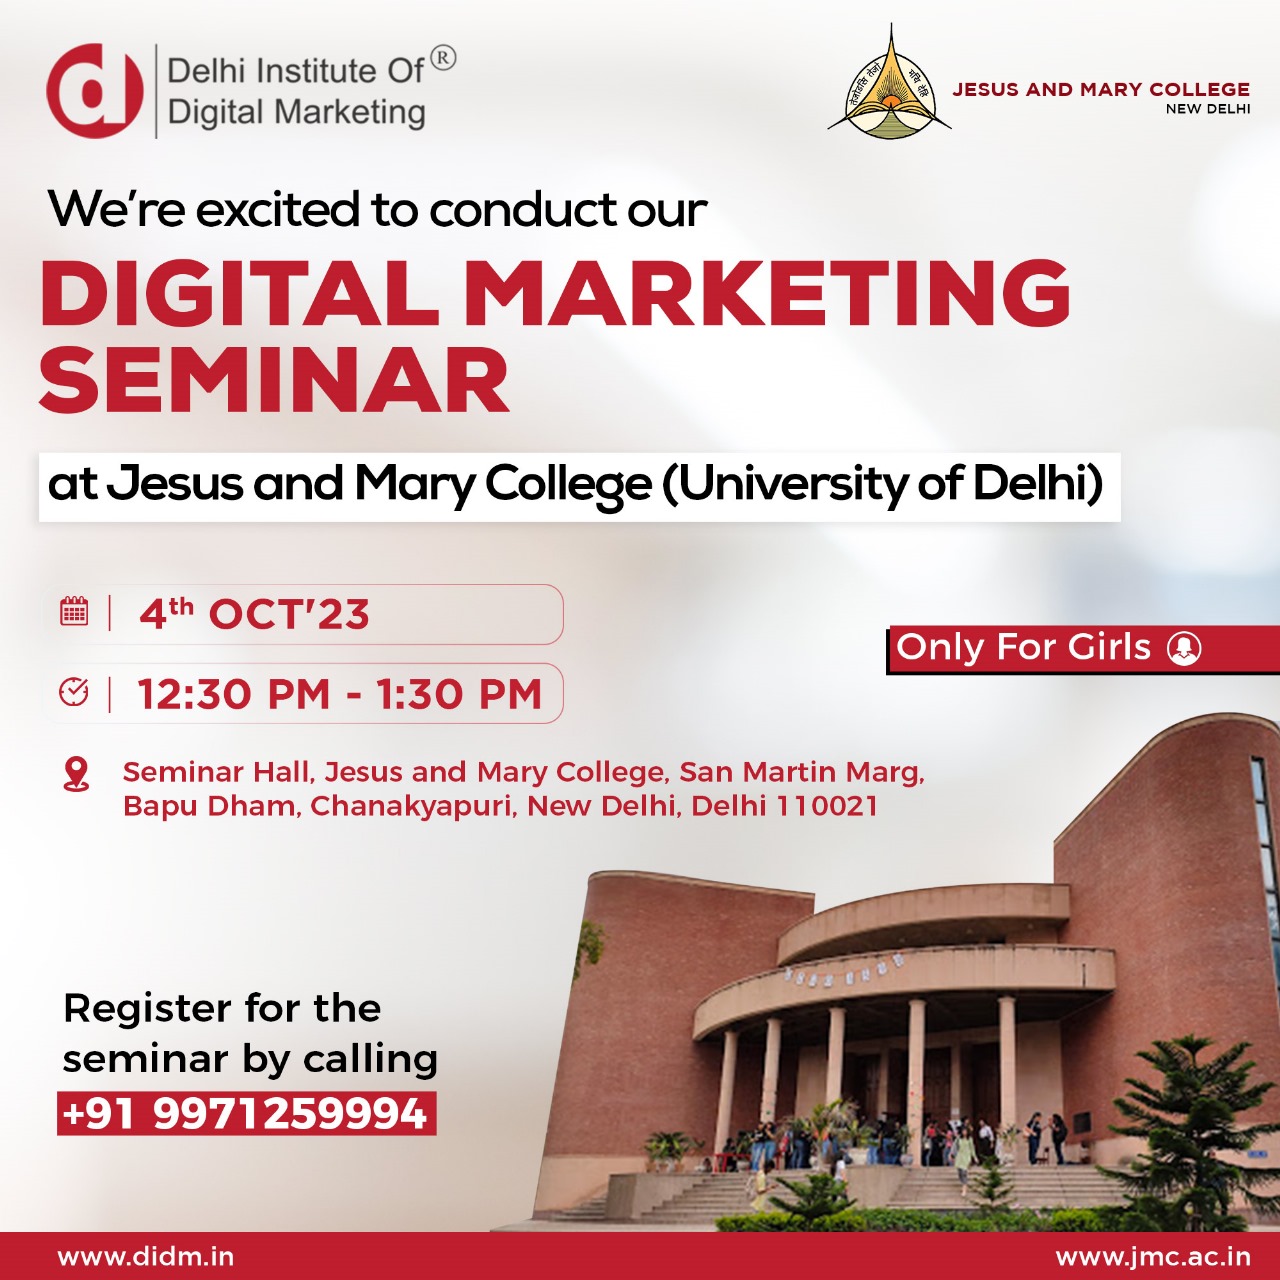 DIDM is conducting a digital marketing seminar at Jesus and Mary College (University of Delhi)